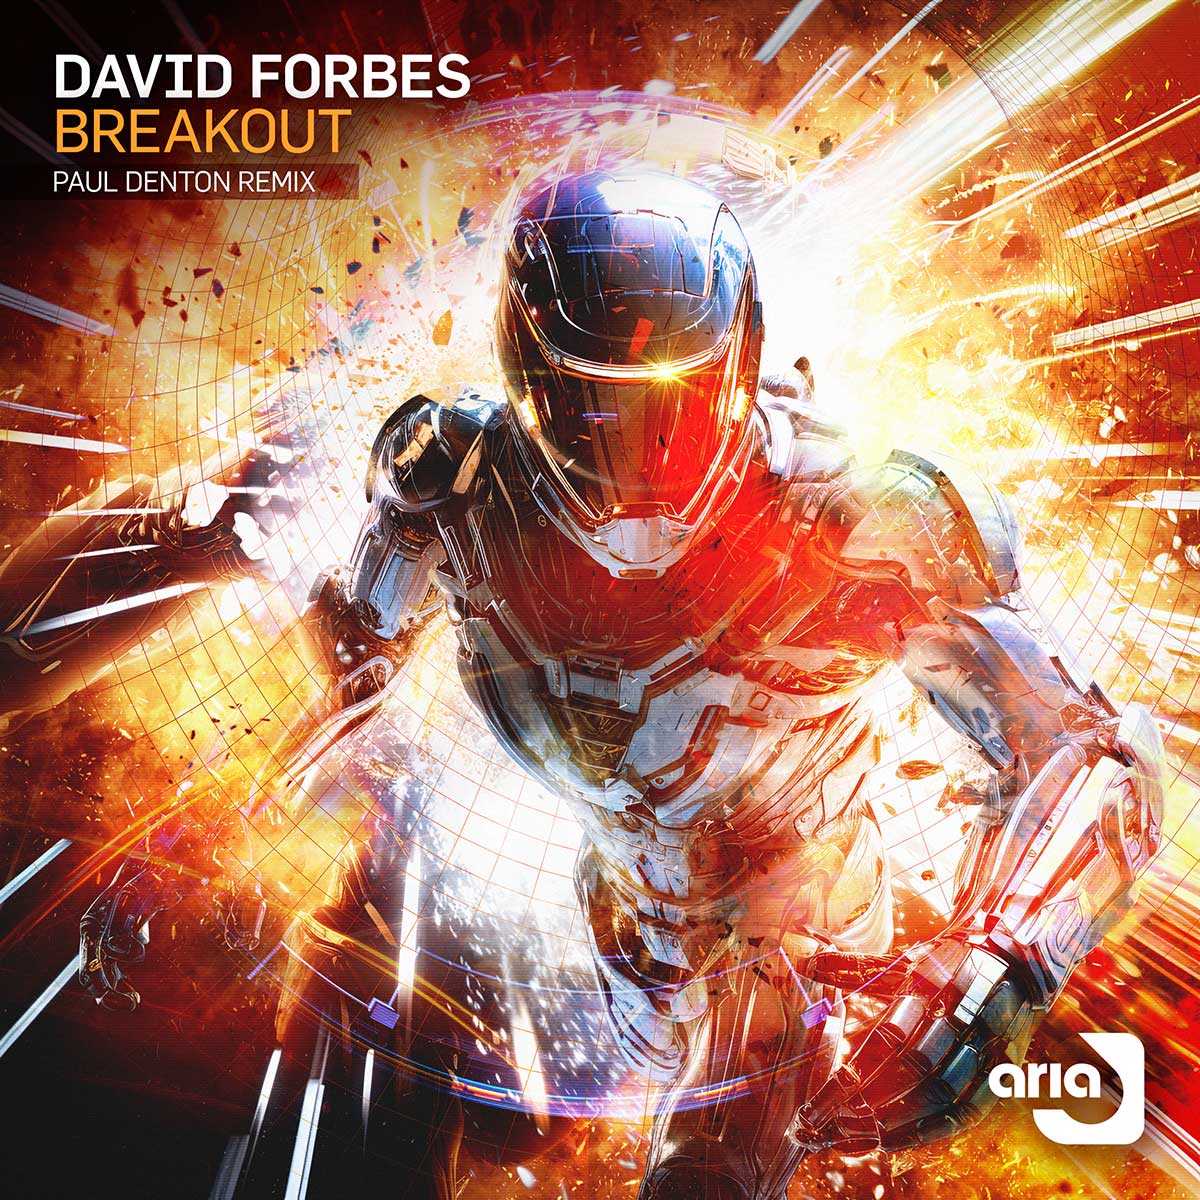 Label boss @djdavidforbes classic tech trance track Breakout - First released on Liquid Records [Spinnin] - gets the @DjPaulDenton treatment. You all know what to expect! Release Date: 05.04